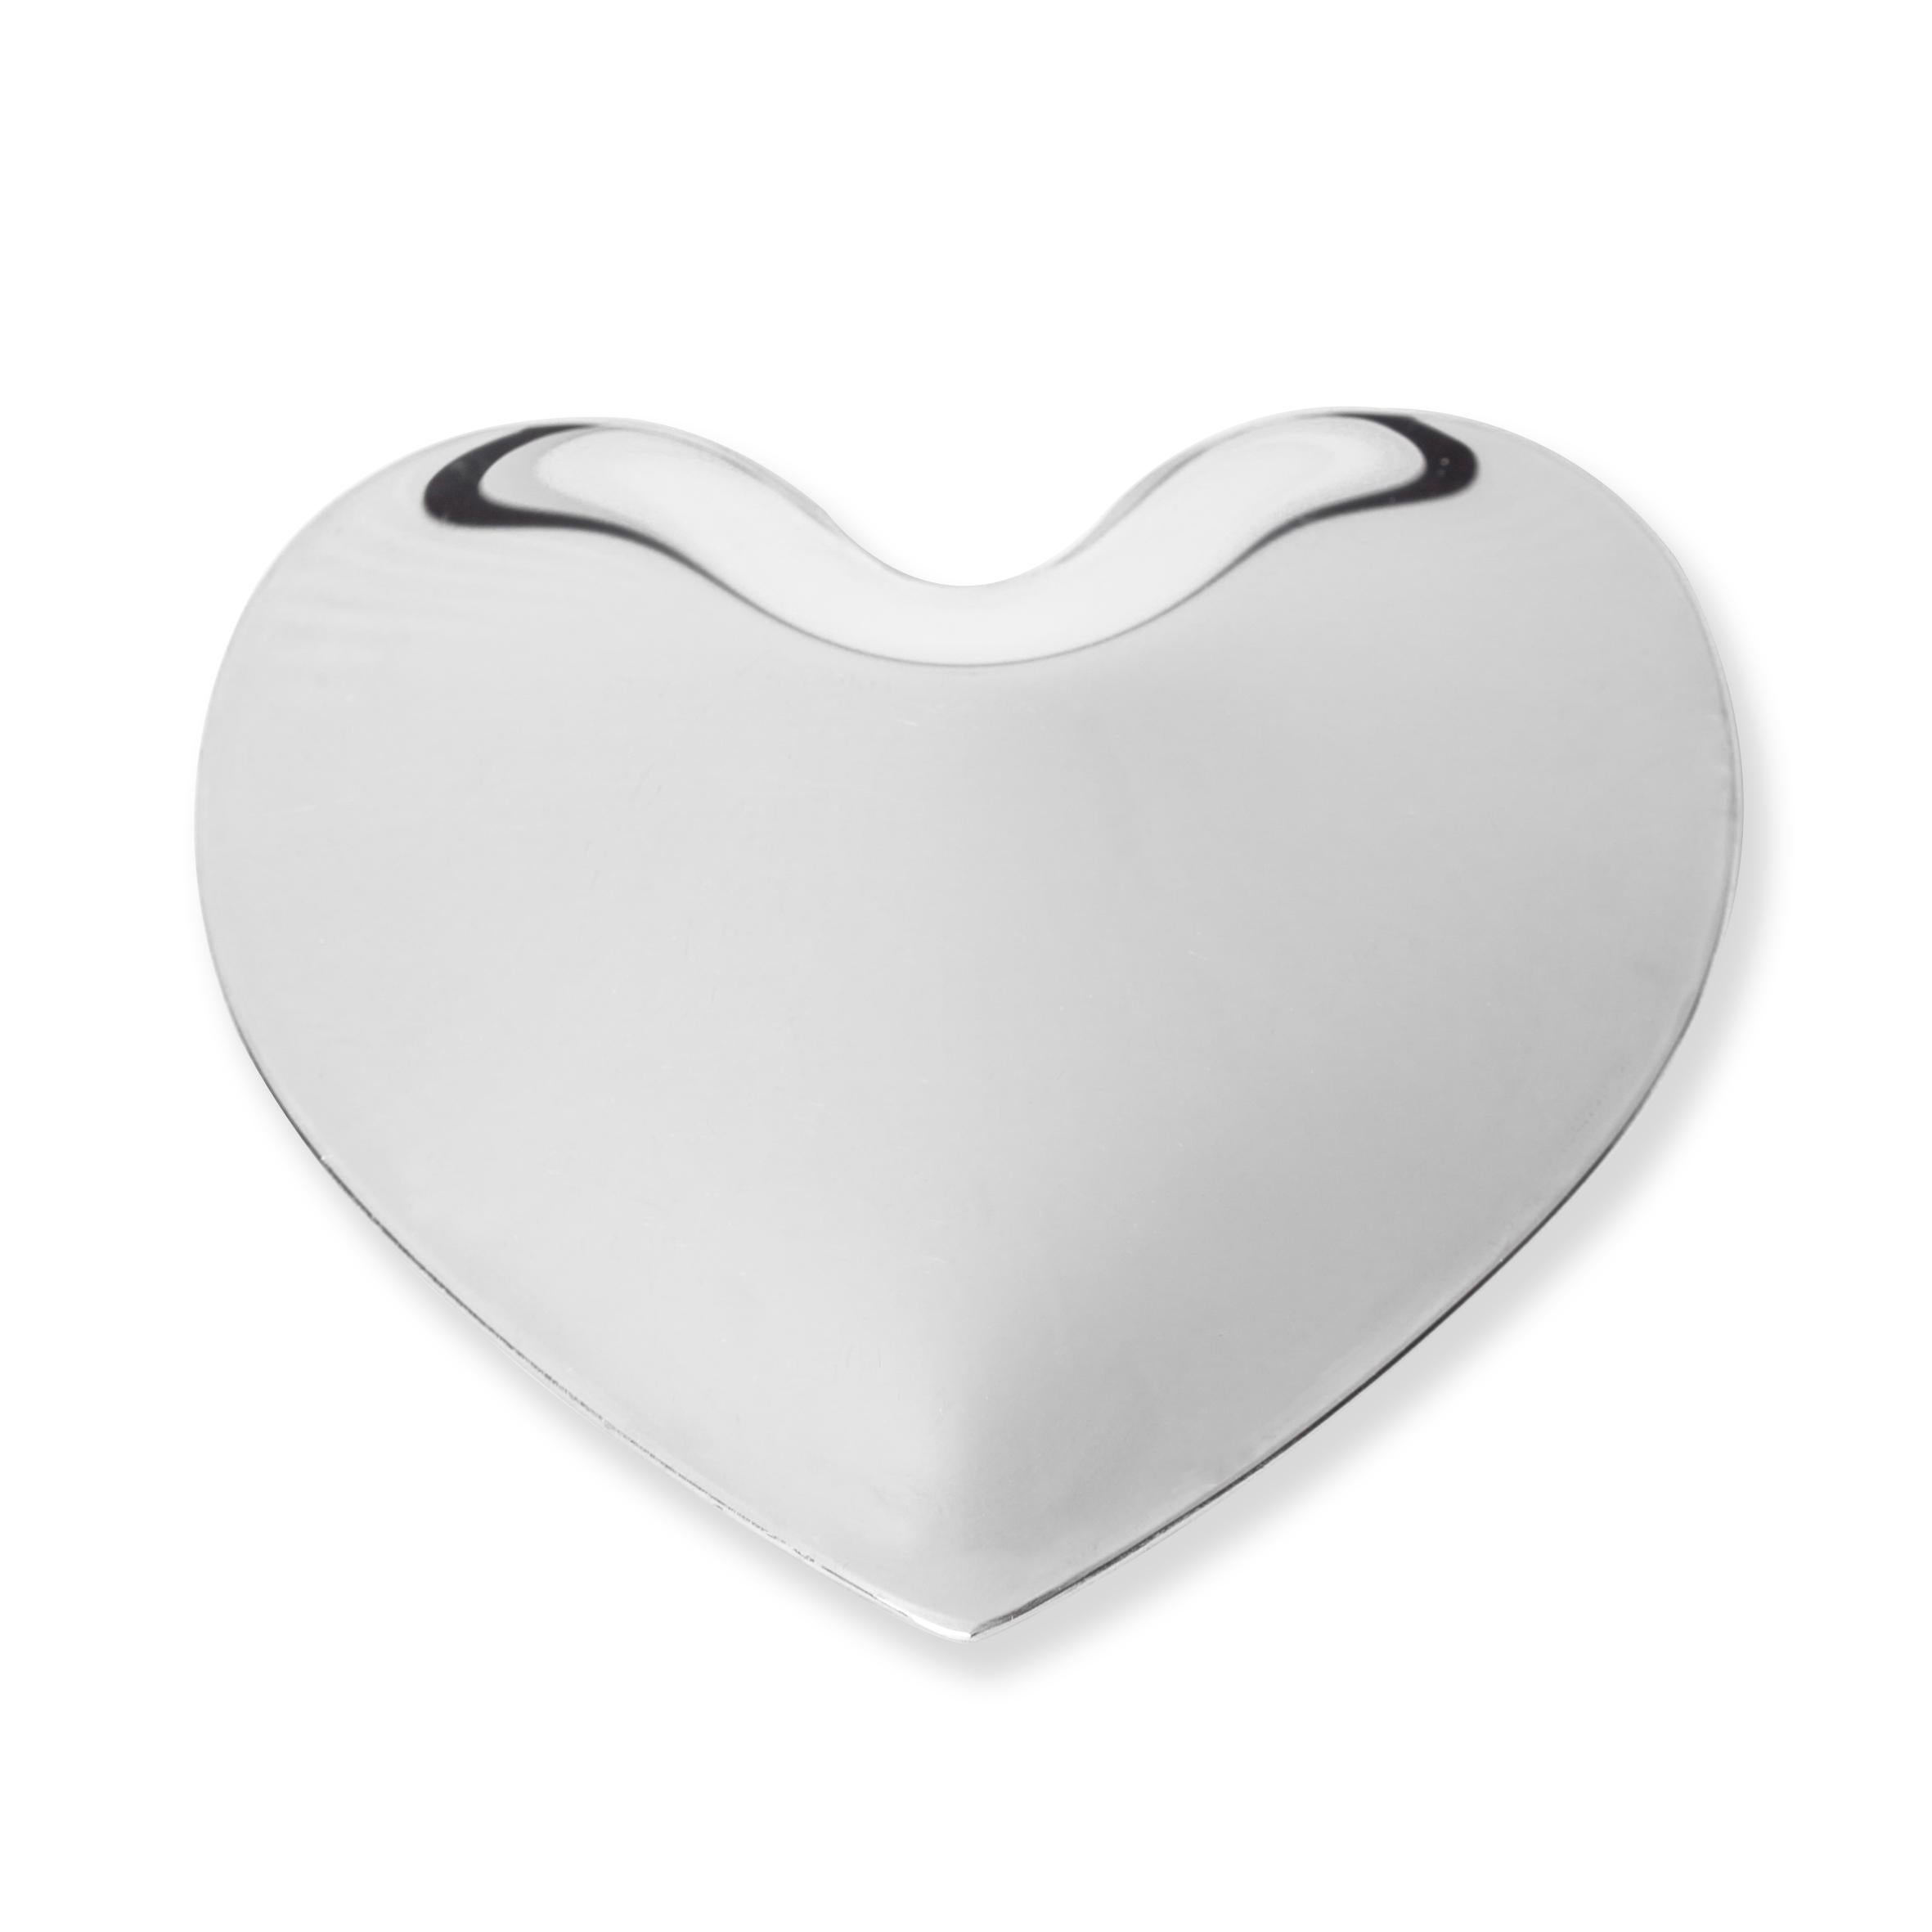 Organic Modern Set of 2 Heart Inflated Hangers by Zieta For Sale